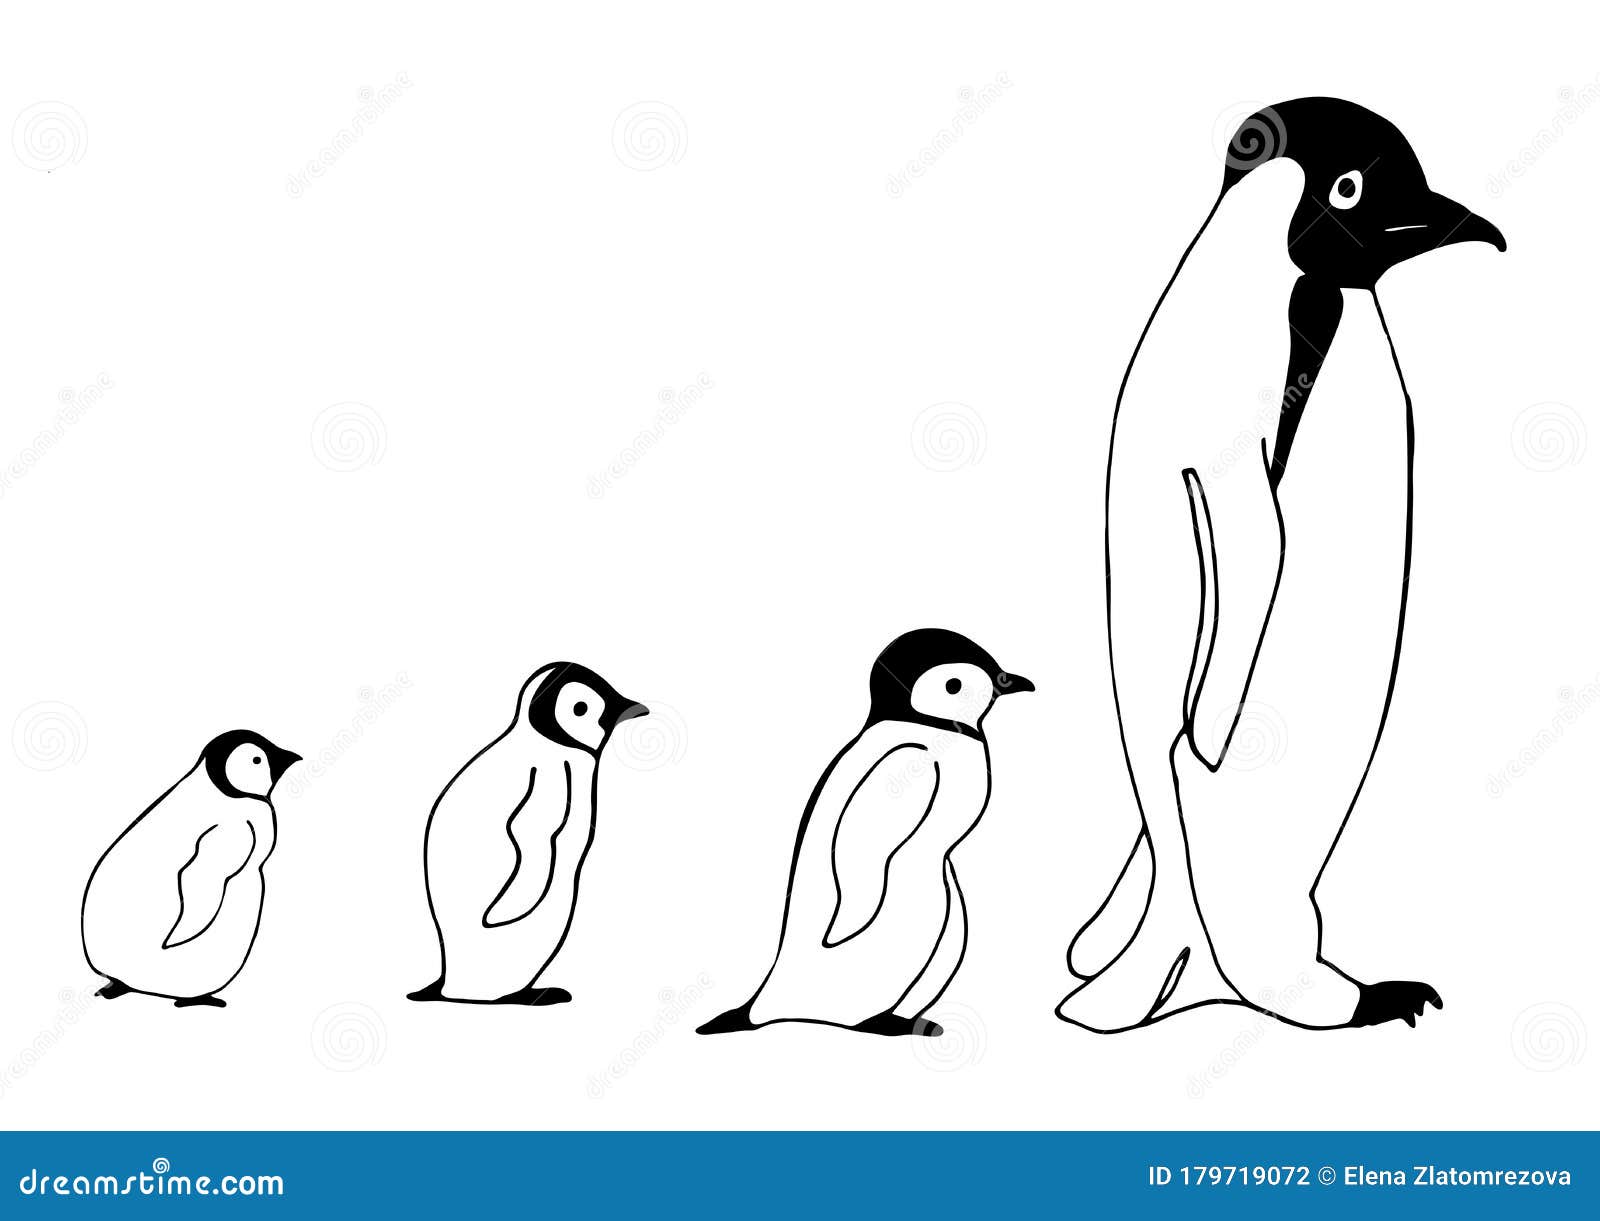 Download Baby Penguin Hand Drawn Picture Sketch For Anti Stress Adult Coloring Book In Zentangle Style Stock Illustration Illustration Of Antarctic Clip 179719072